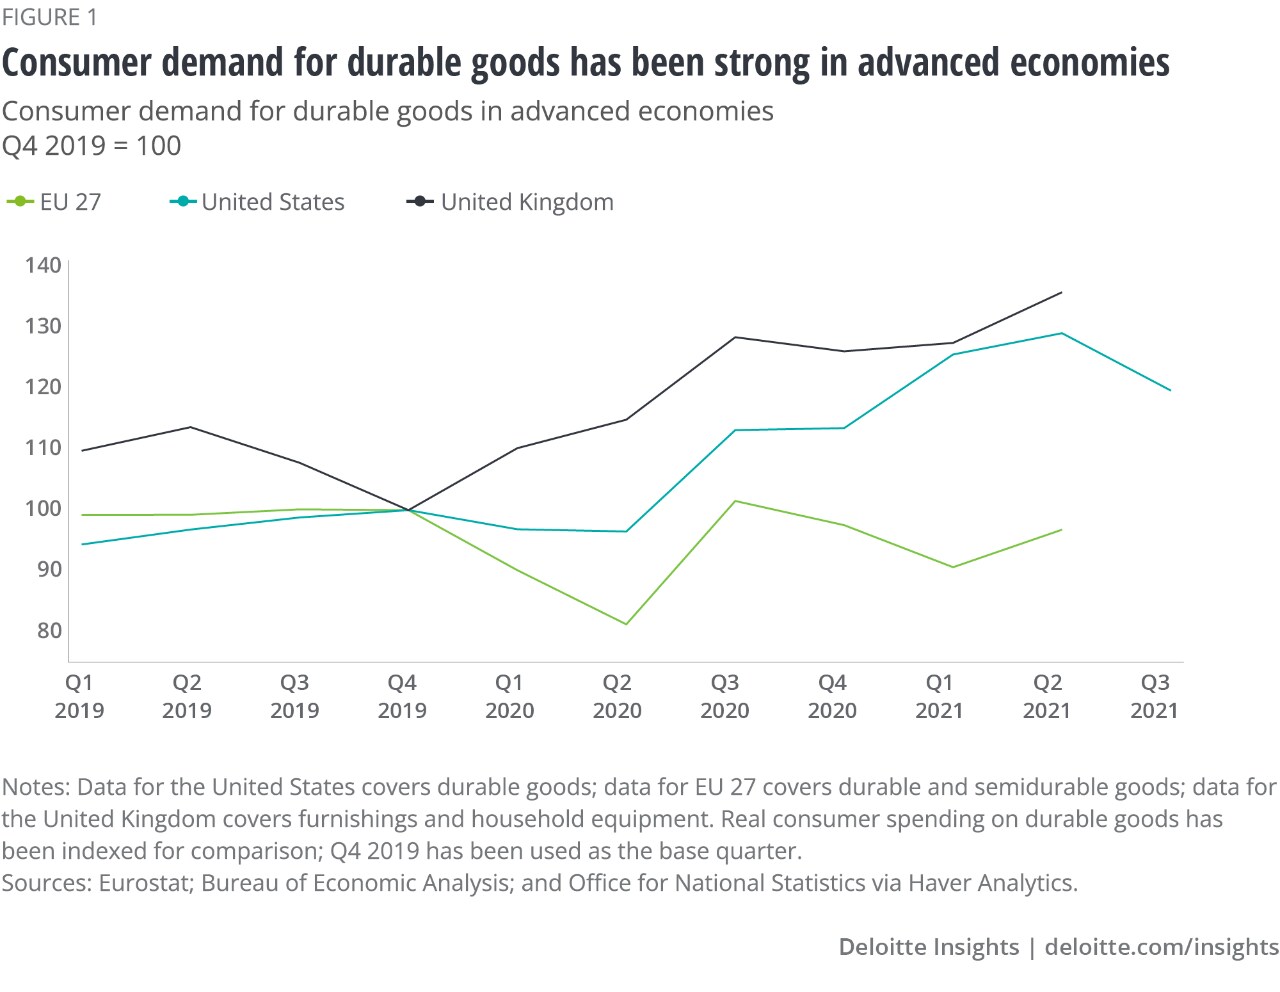 Figure 1: Consumer demand for durable goods has been strong in advanced economies